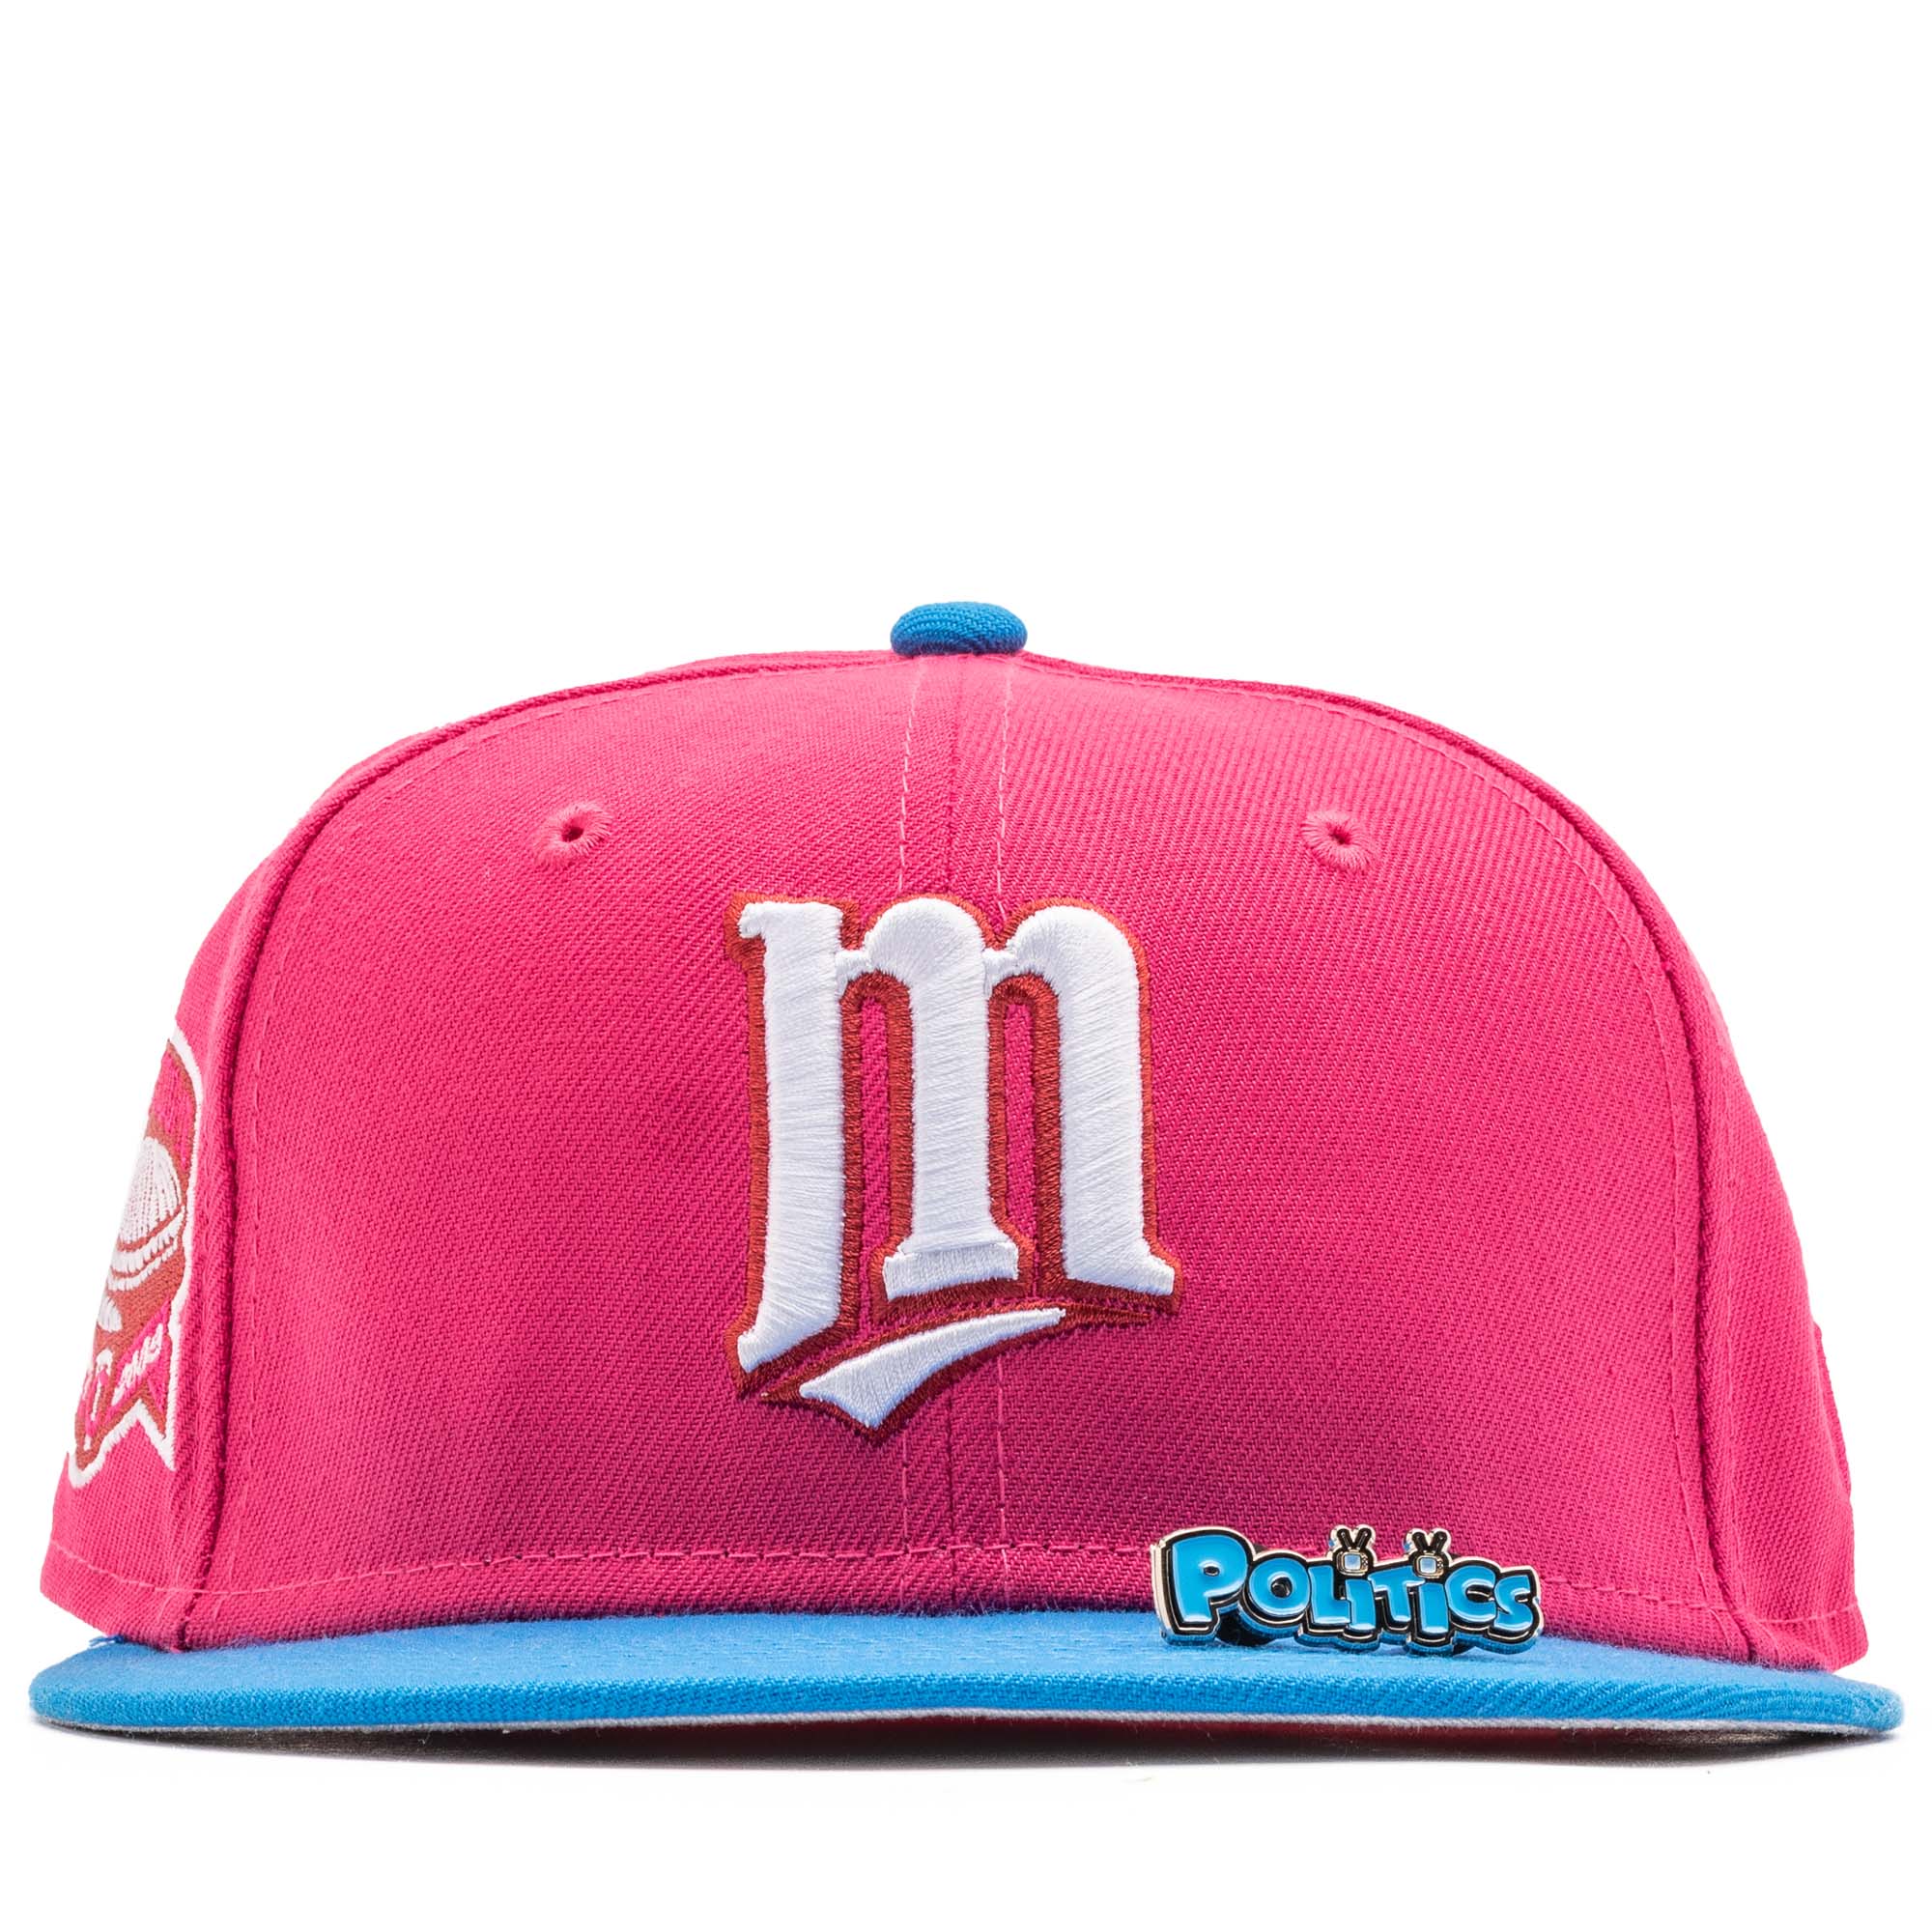 New Era x Politics Minnesota Twins 59FIFTY Fitted Hat - Beetroot/Southwest Blue, Size 7 1/8 by Sneaker Politics